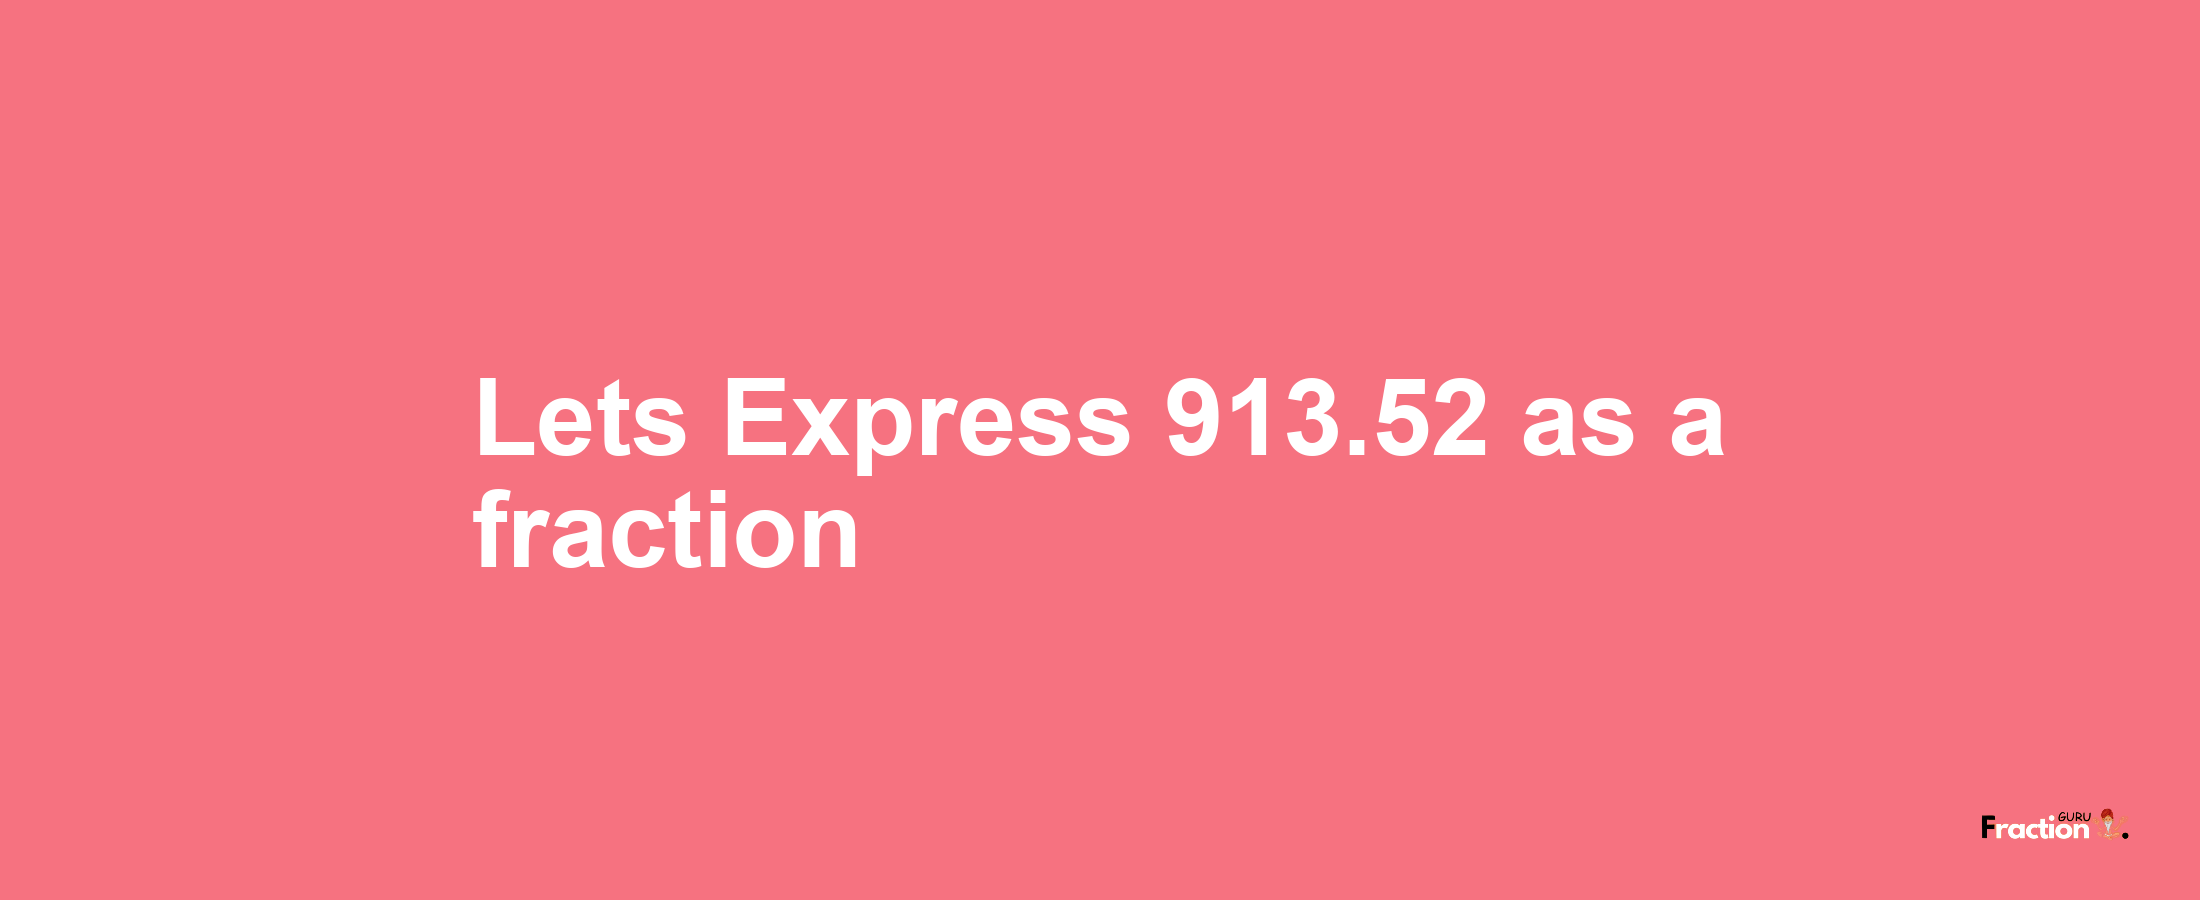 Lets Express 913.52 as afraction